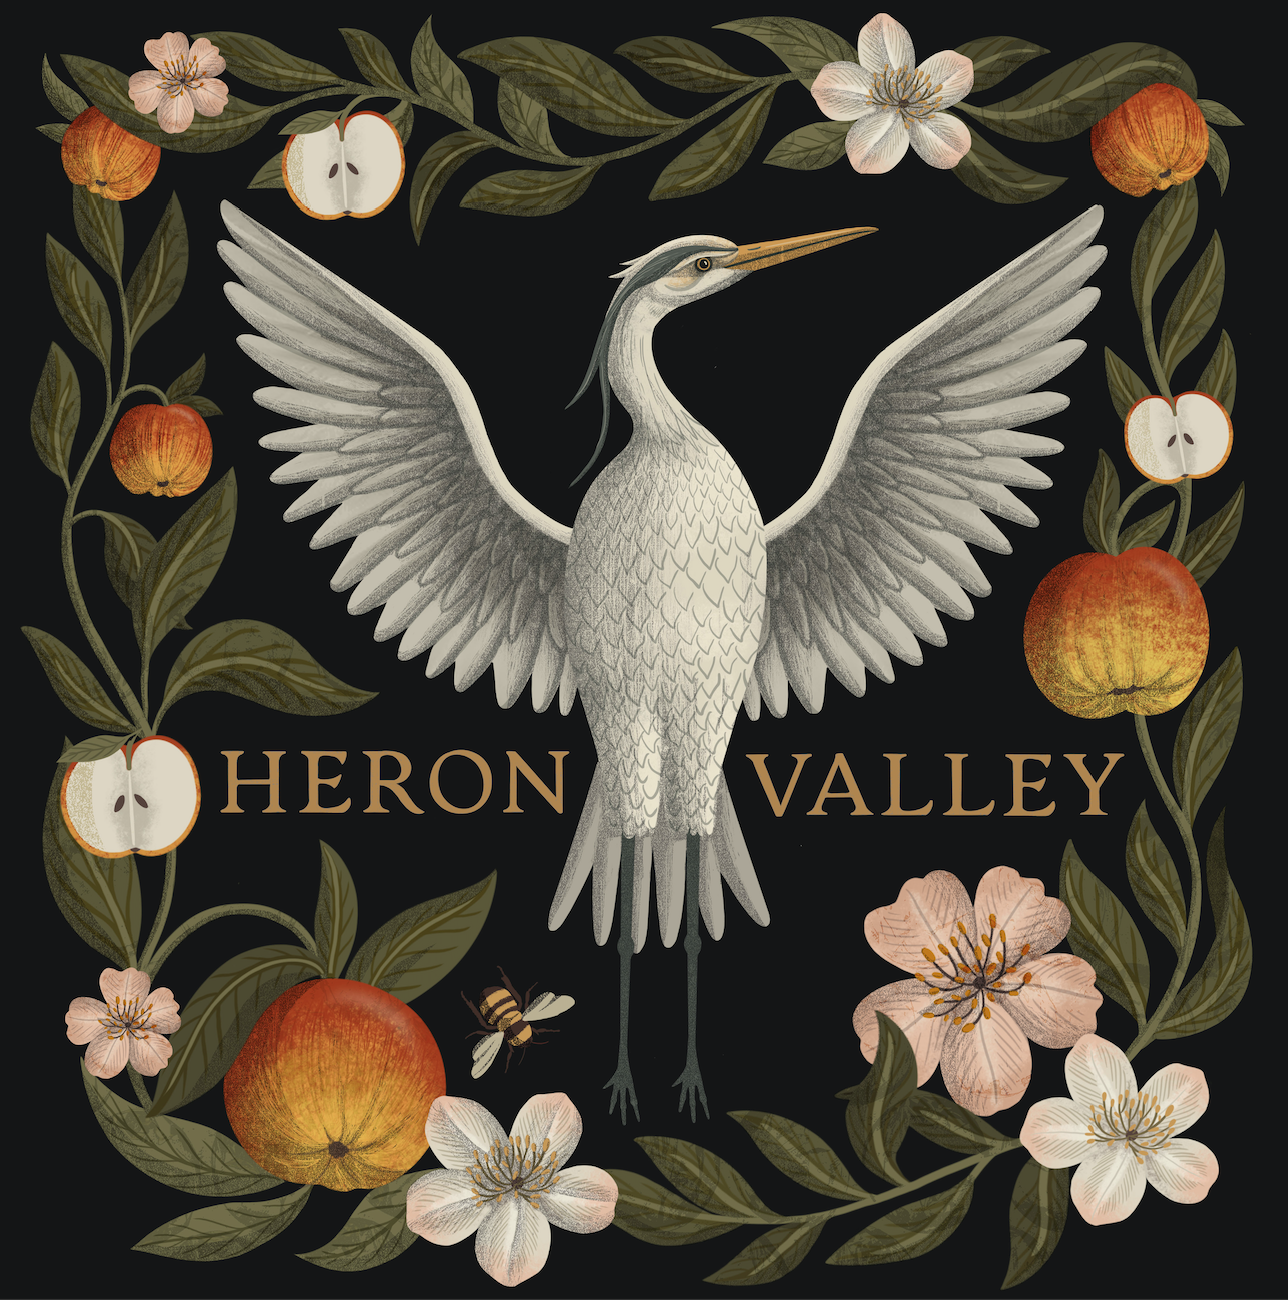 Heron Valley illustration by Lucy Rose